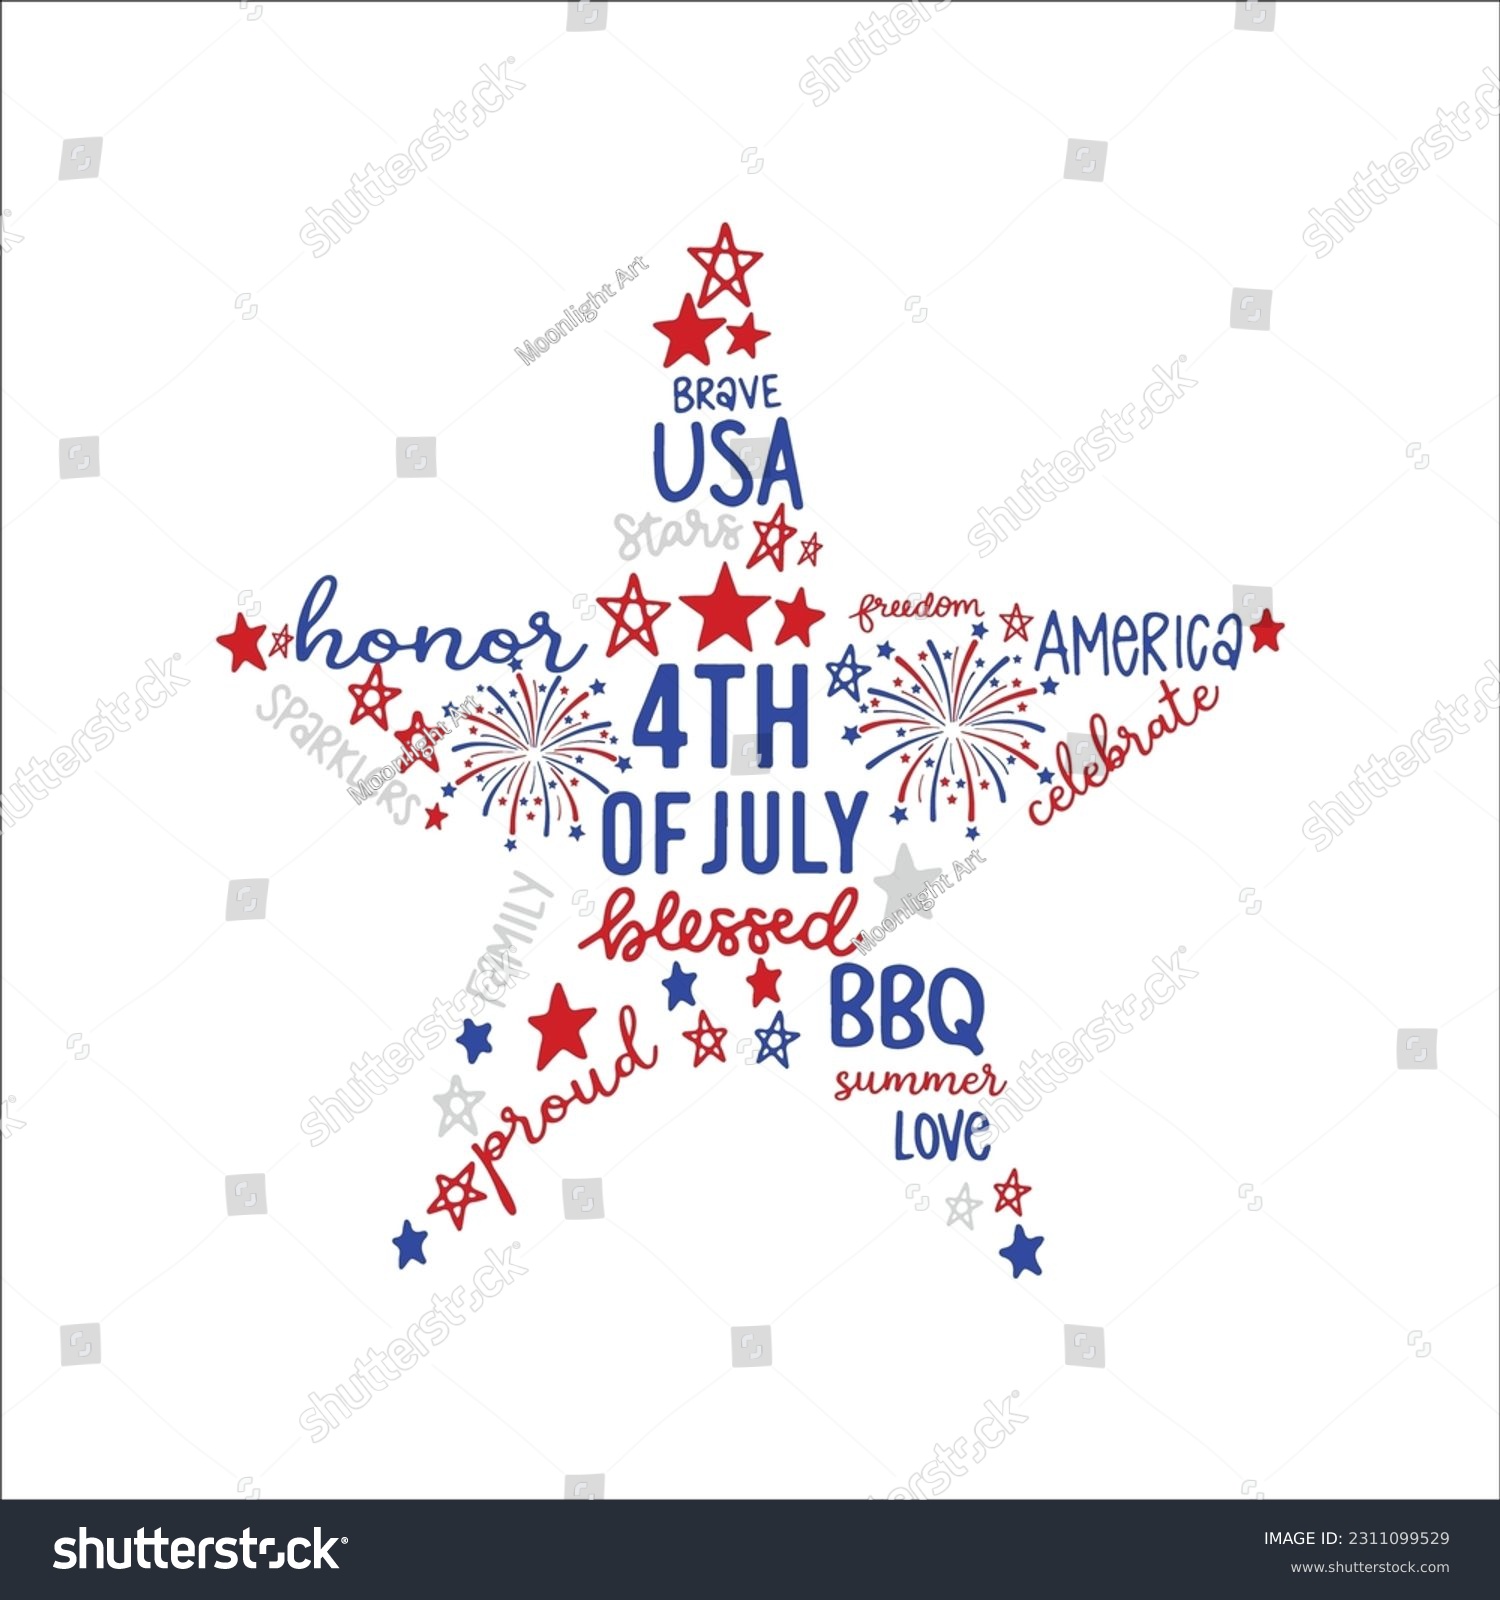 SVG of USA flag Star Svg, Independence day, Patriotic Cut File, American Star svg, 4th of July, USA flag, Cricut and Silhouette Cut file svg